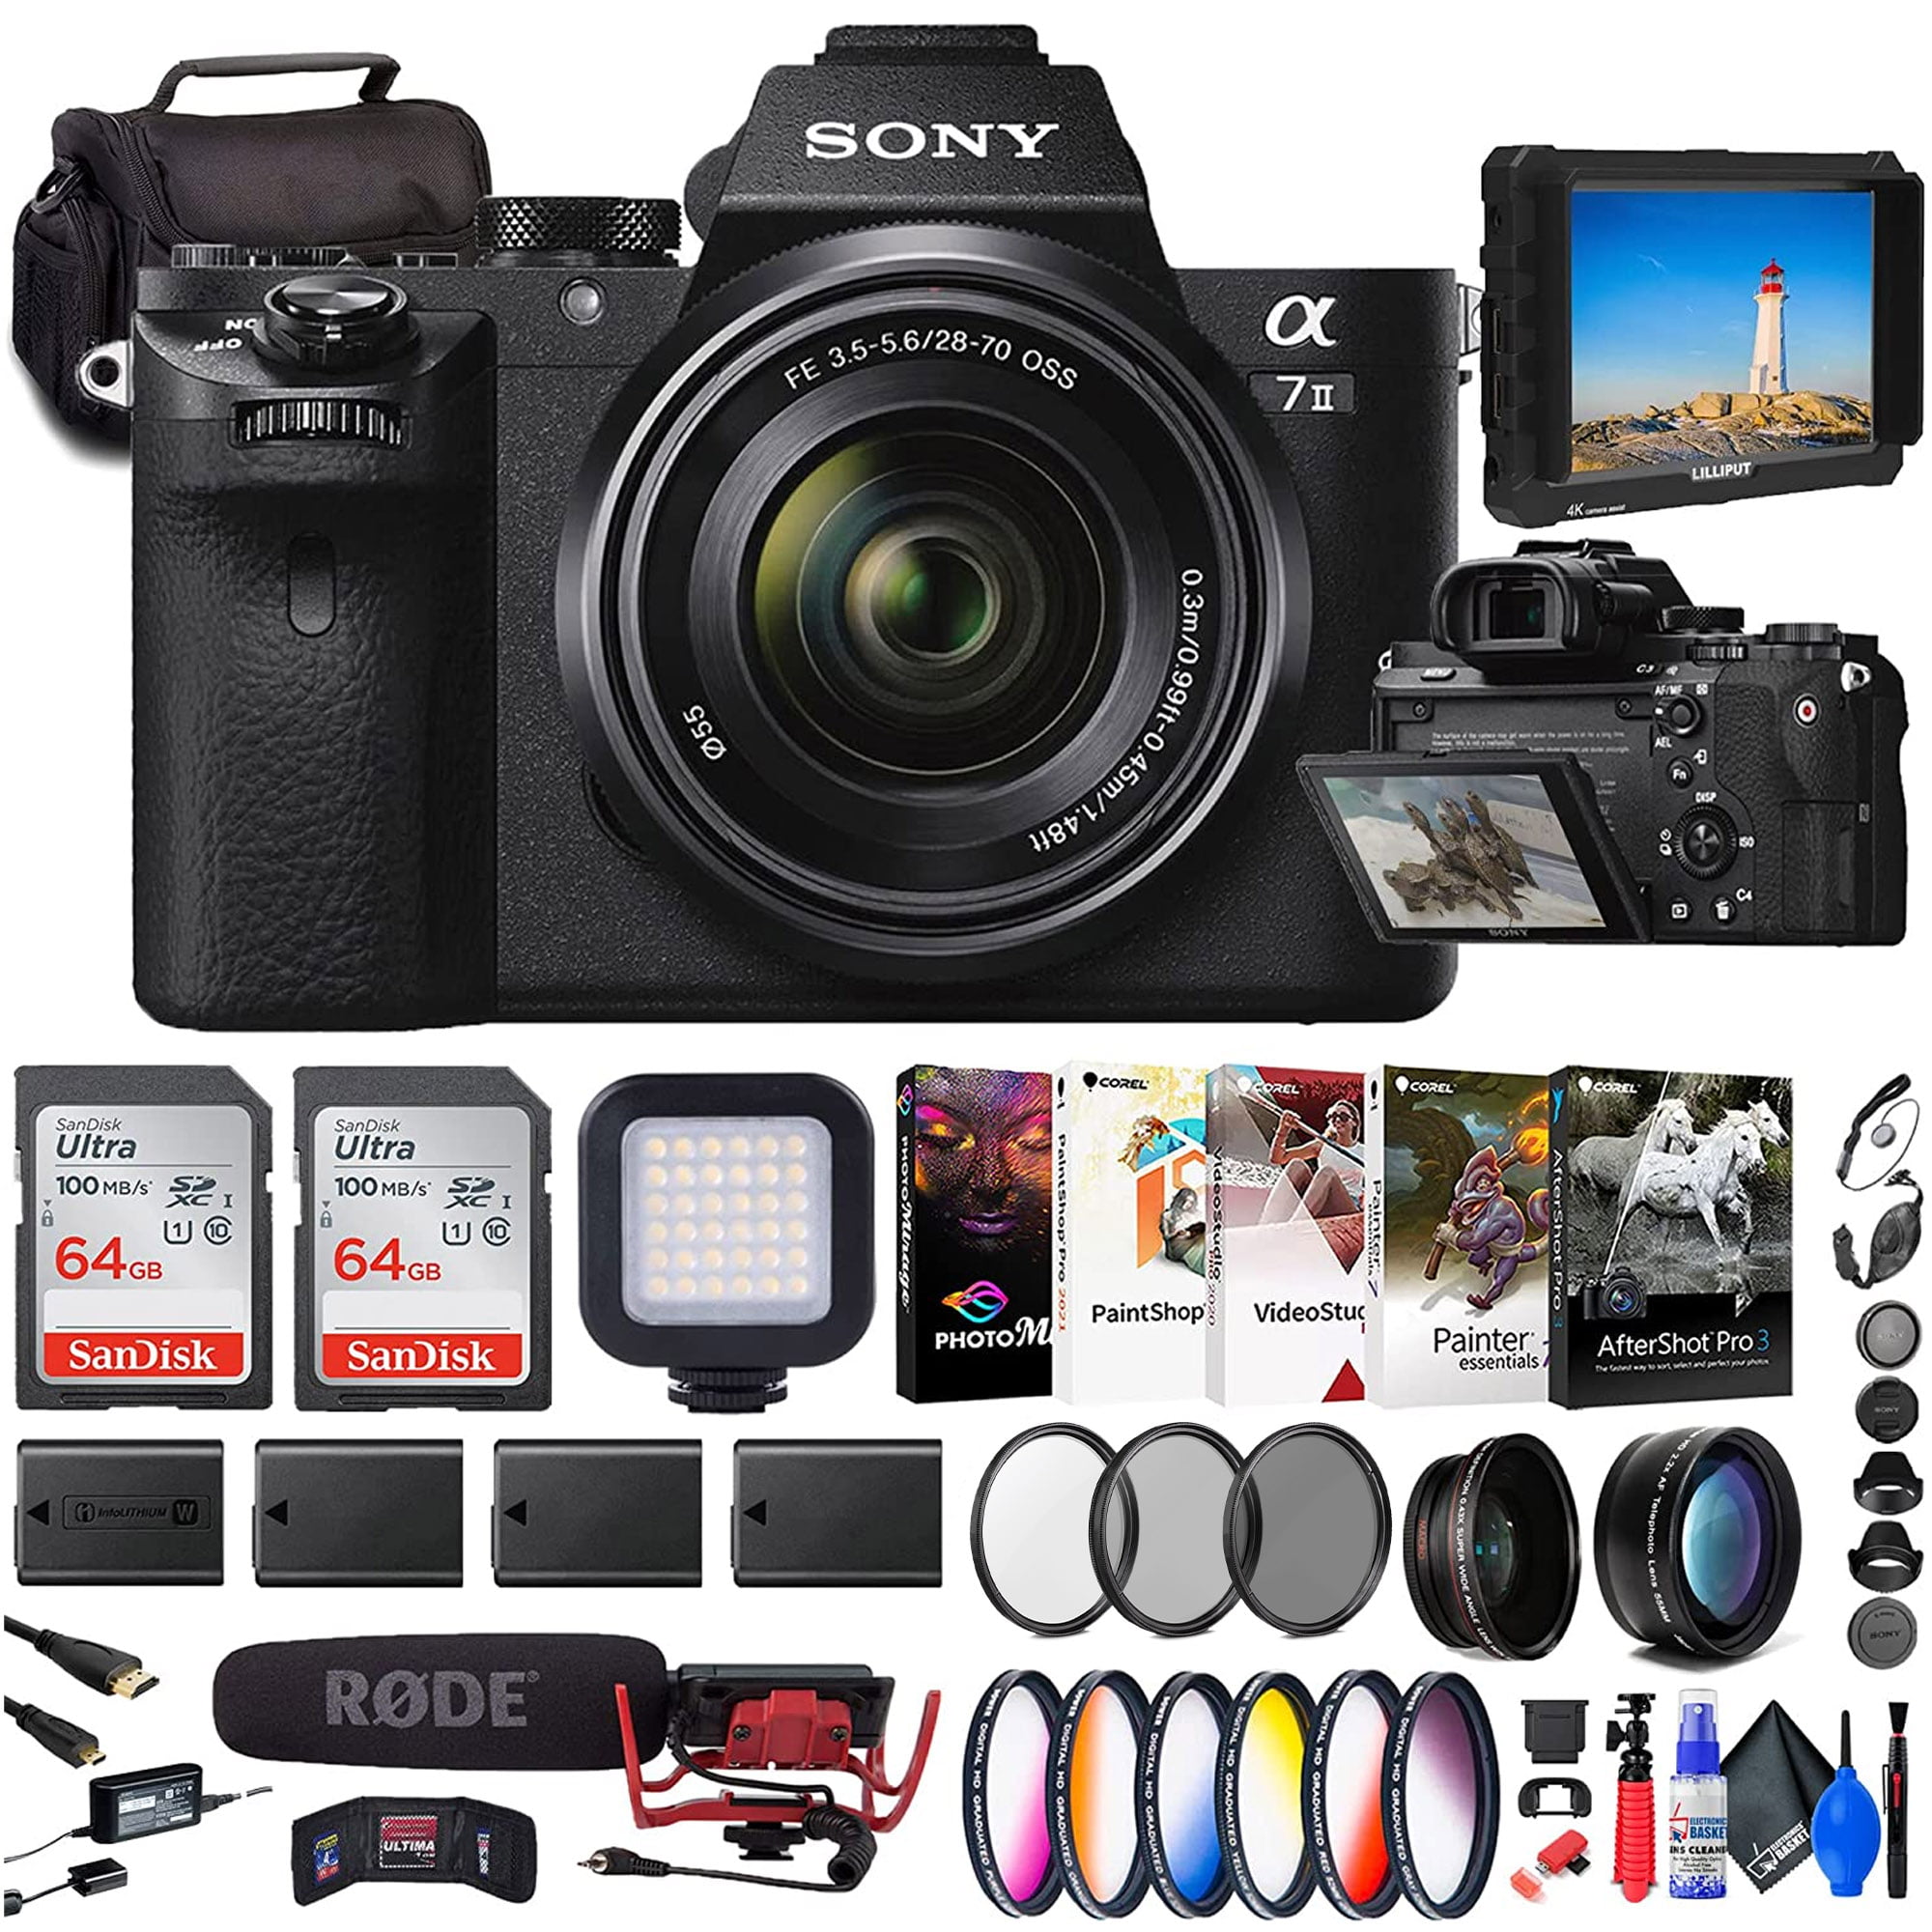 Sony Alpha a7 II Full-Frame Mirrorless Video Camera with 28-70mm